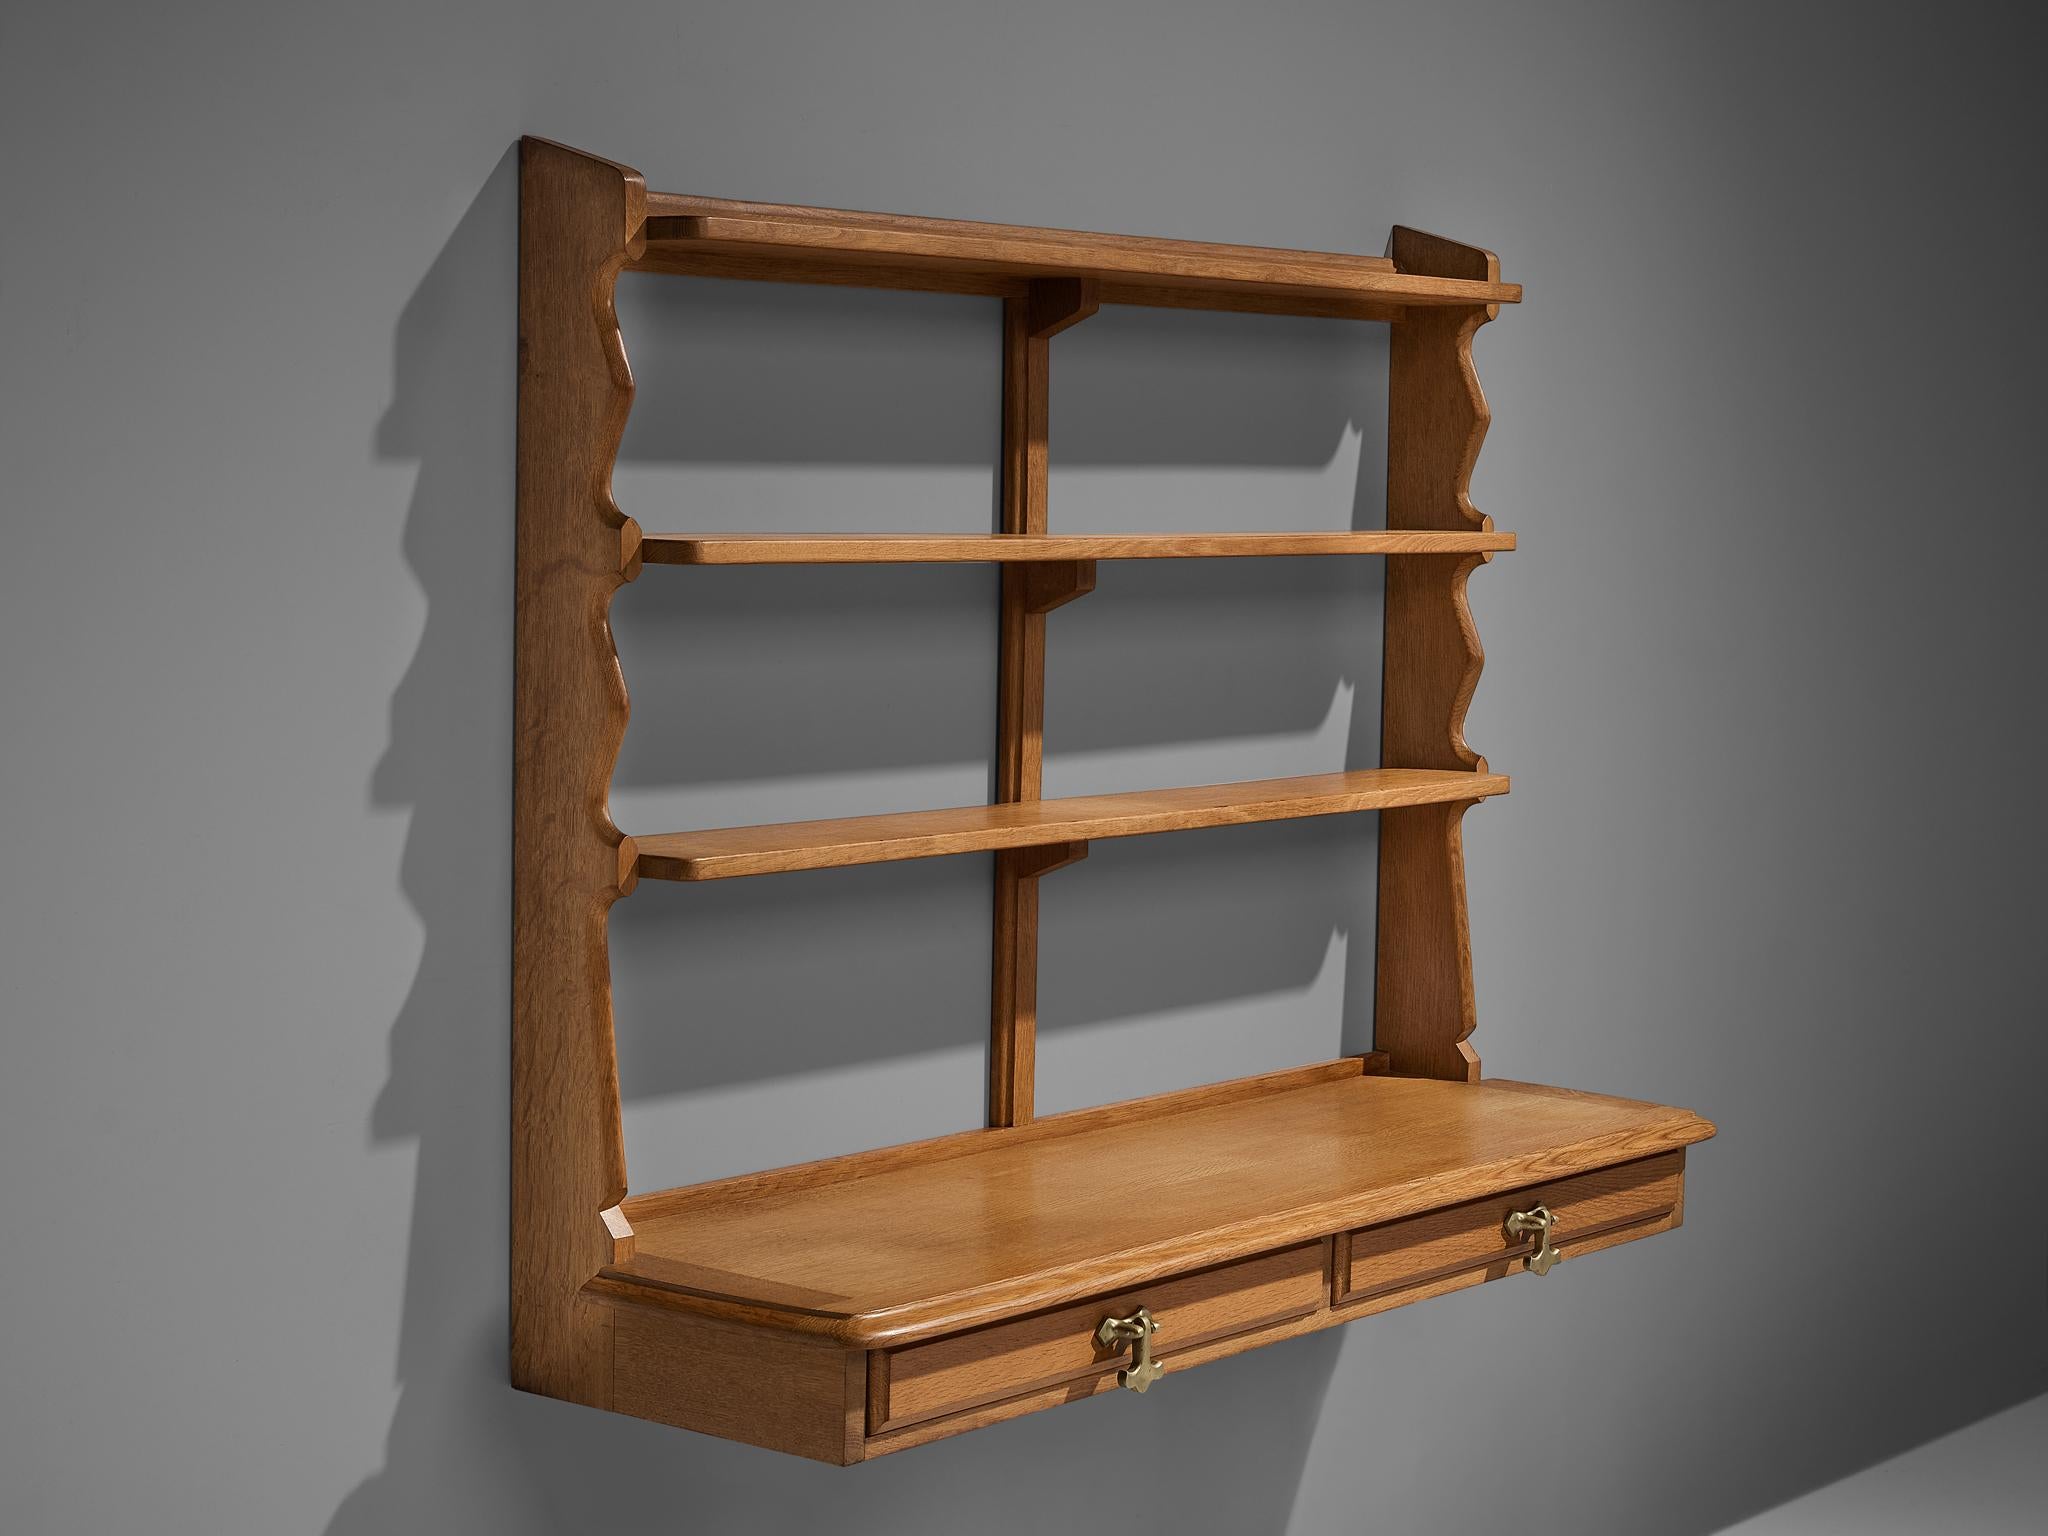 Guillerme et Chambron for Votre Maison, wall-mounted shelf with drawers, oak, brass, France, 1960s

Guillerme et Chambron designed this wall-mounted shelf so that it can be used on top of a sideboard and function as open showcase to your most